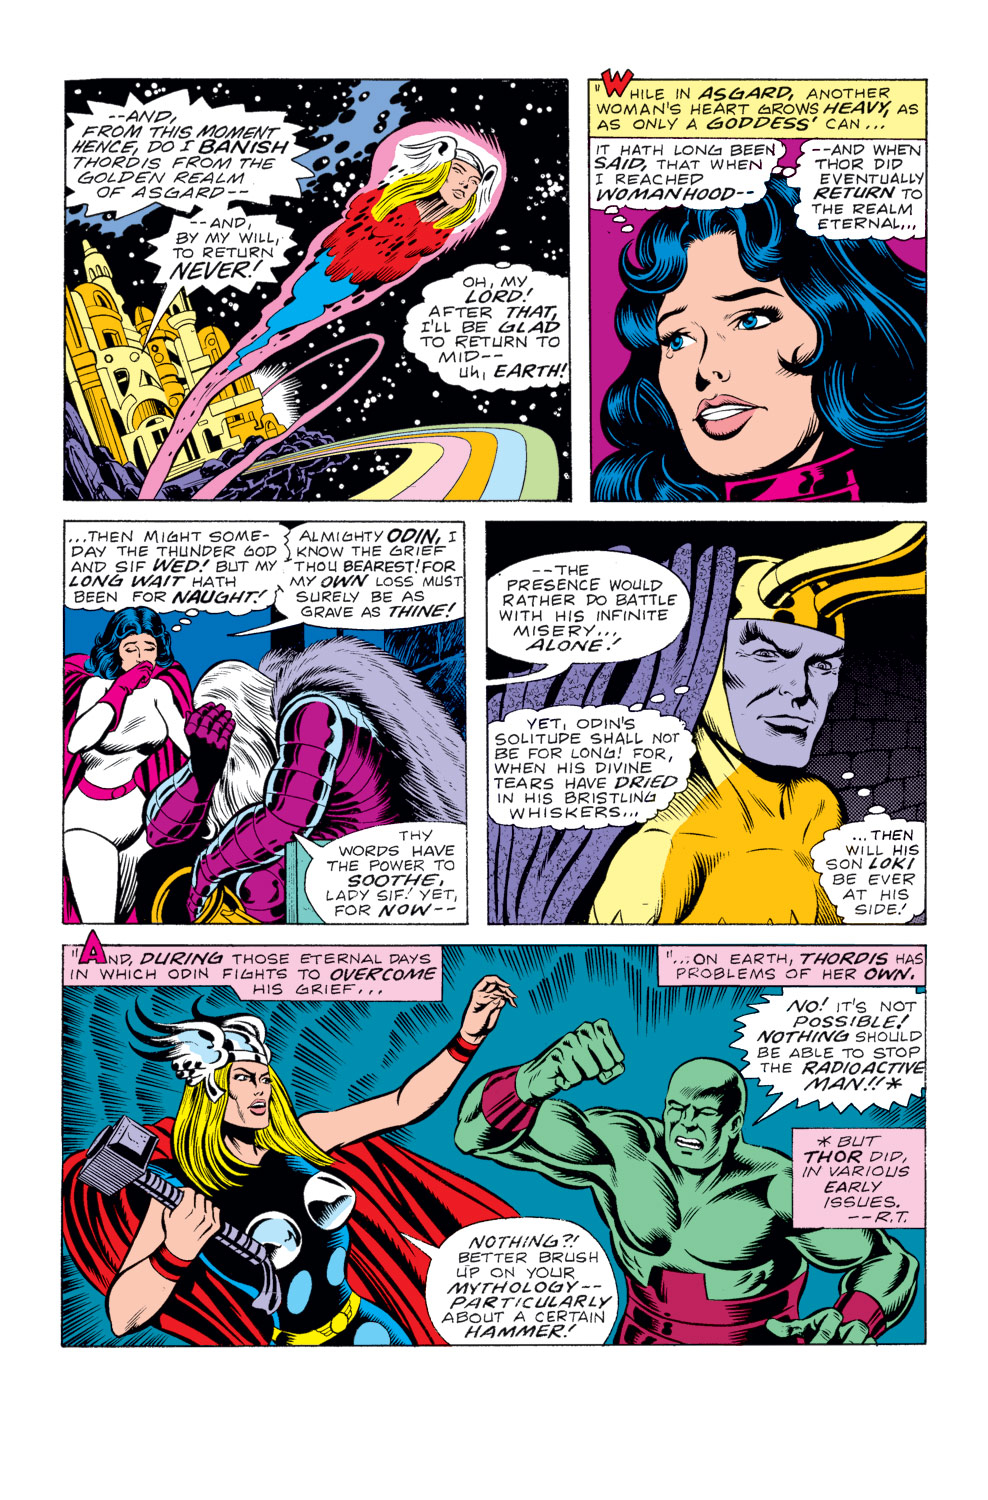 What If? (1977) issue 10 - Jane Foster had found the hammer of Thor - Page 21